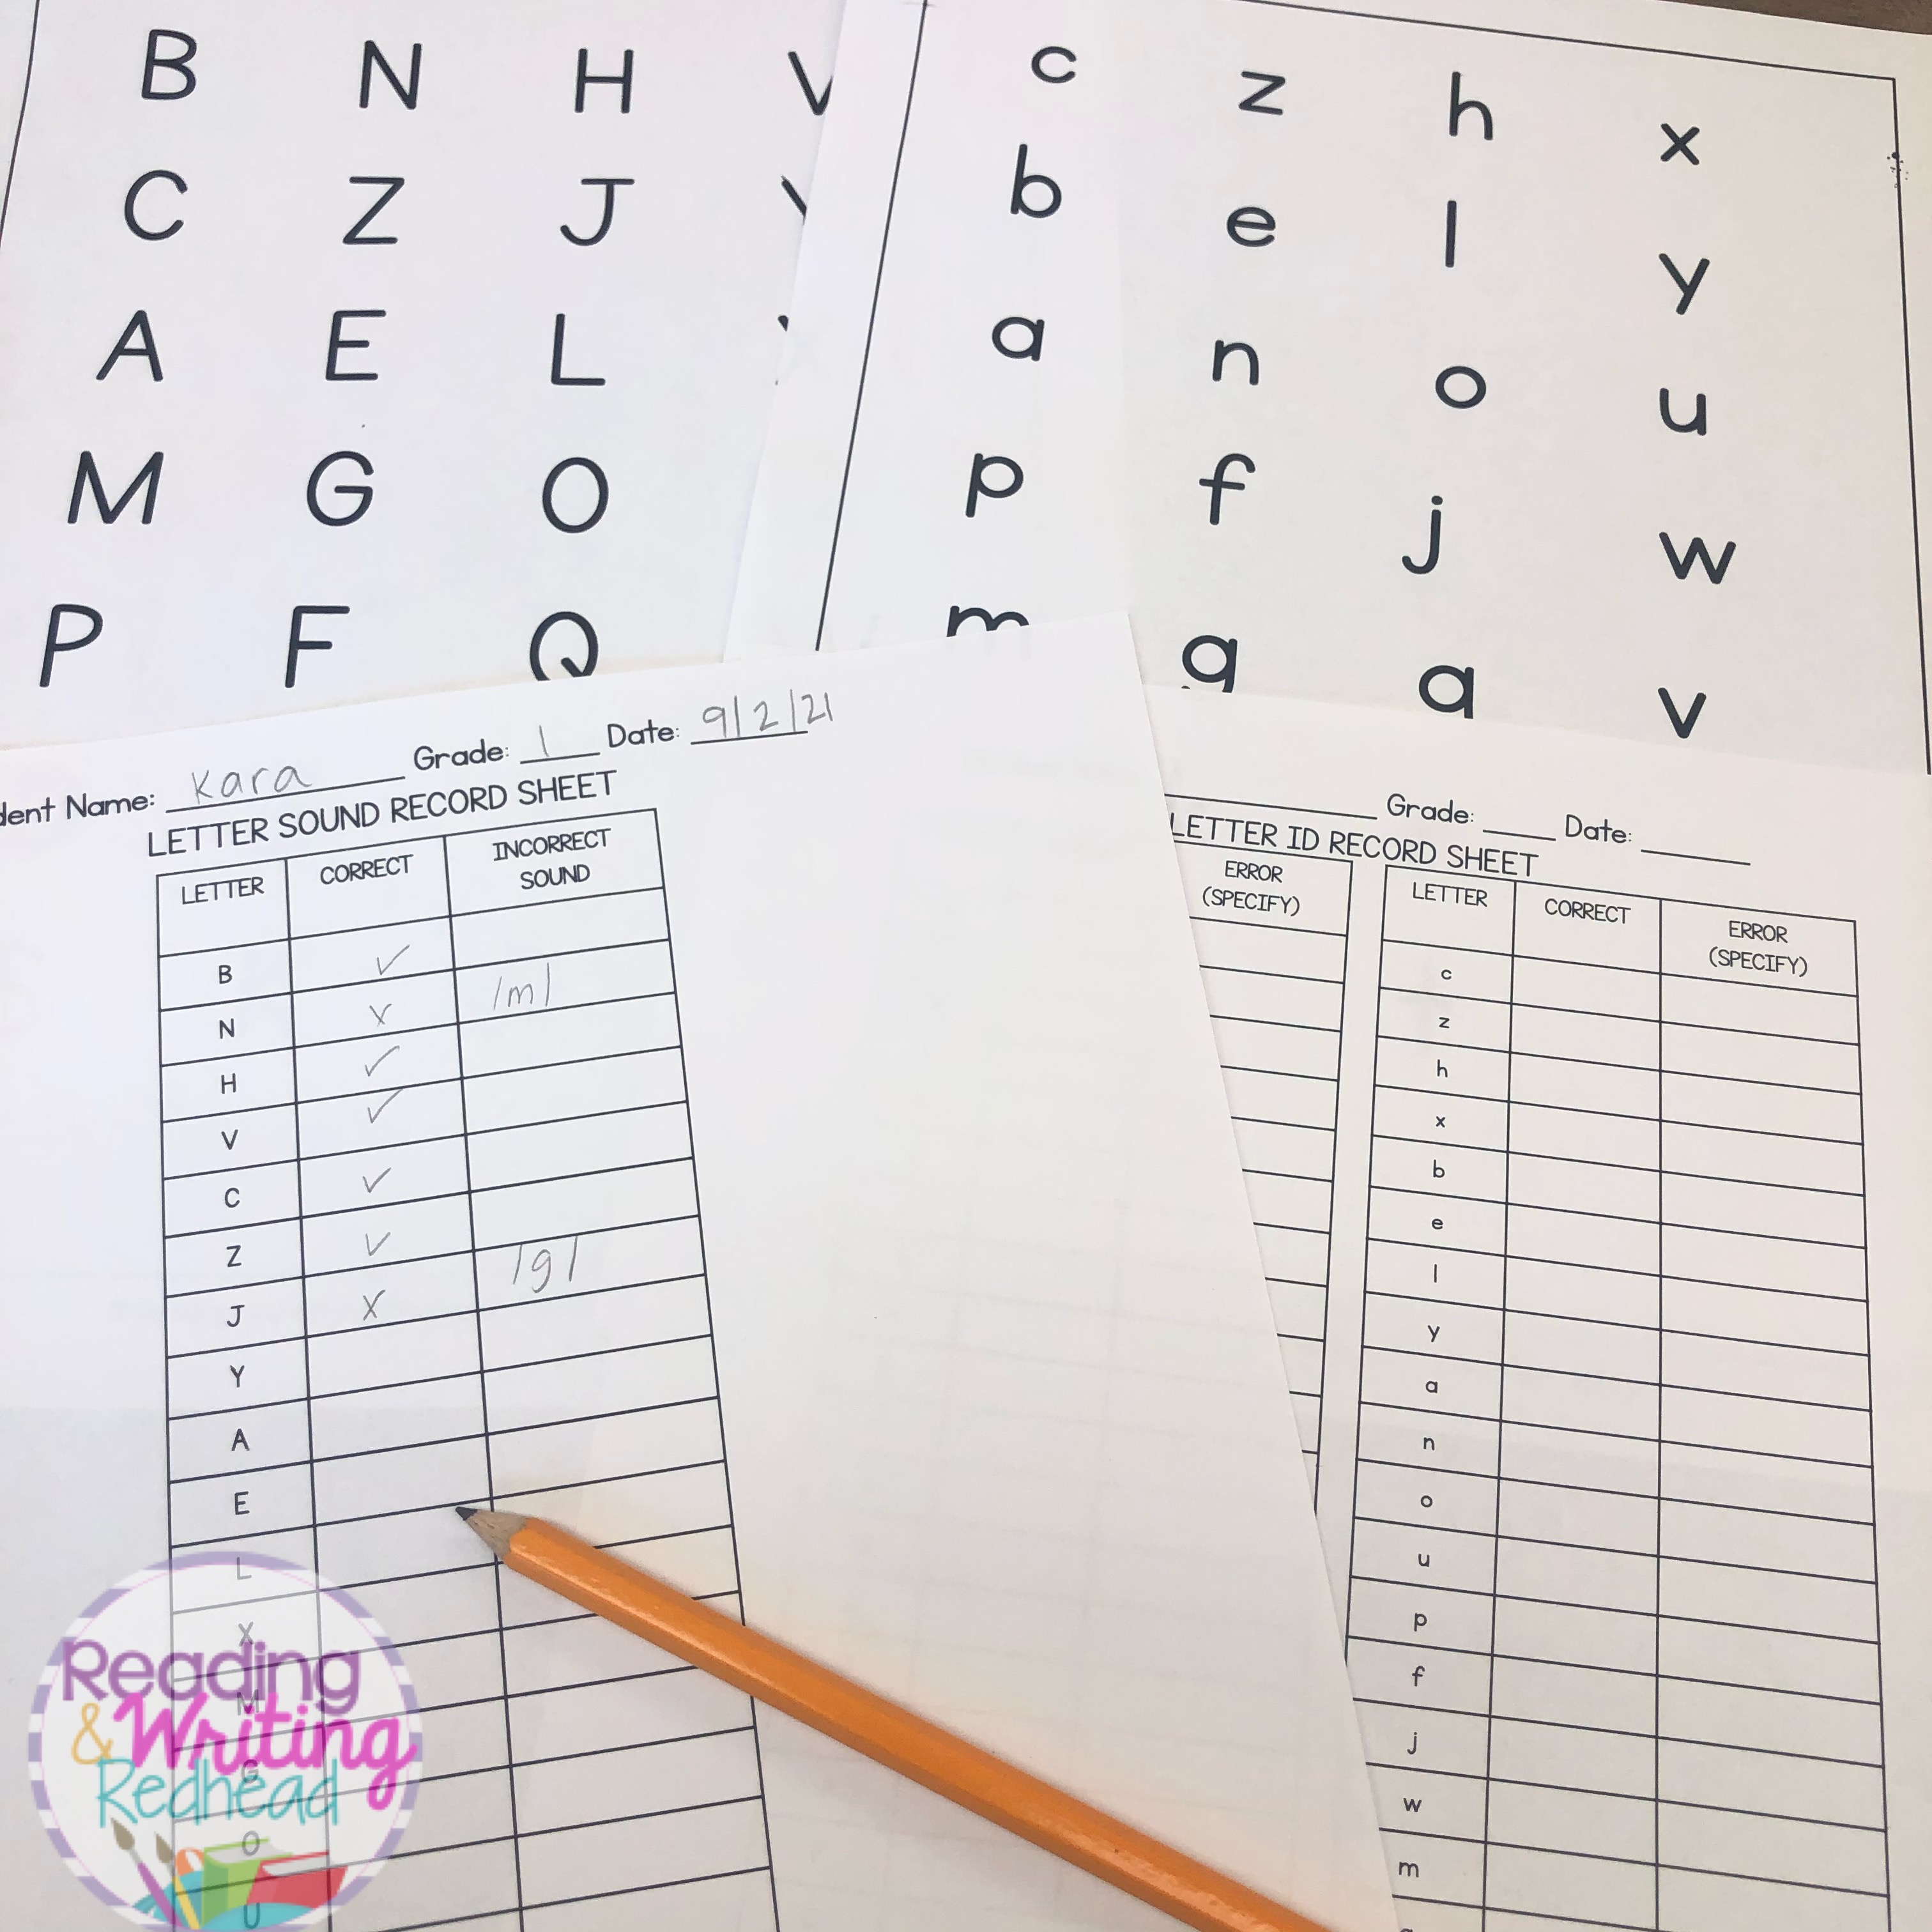 Letter identification and sound assessment